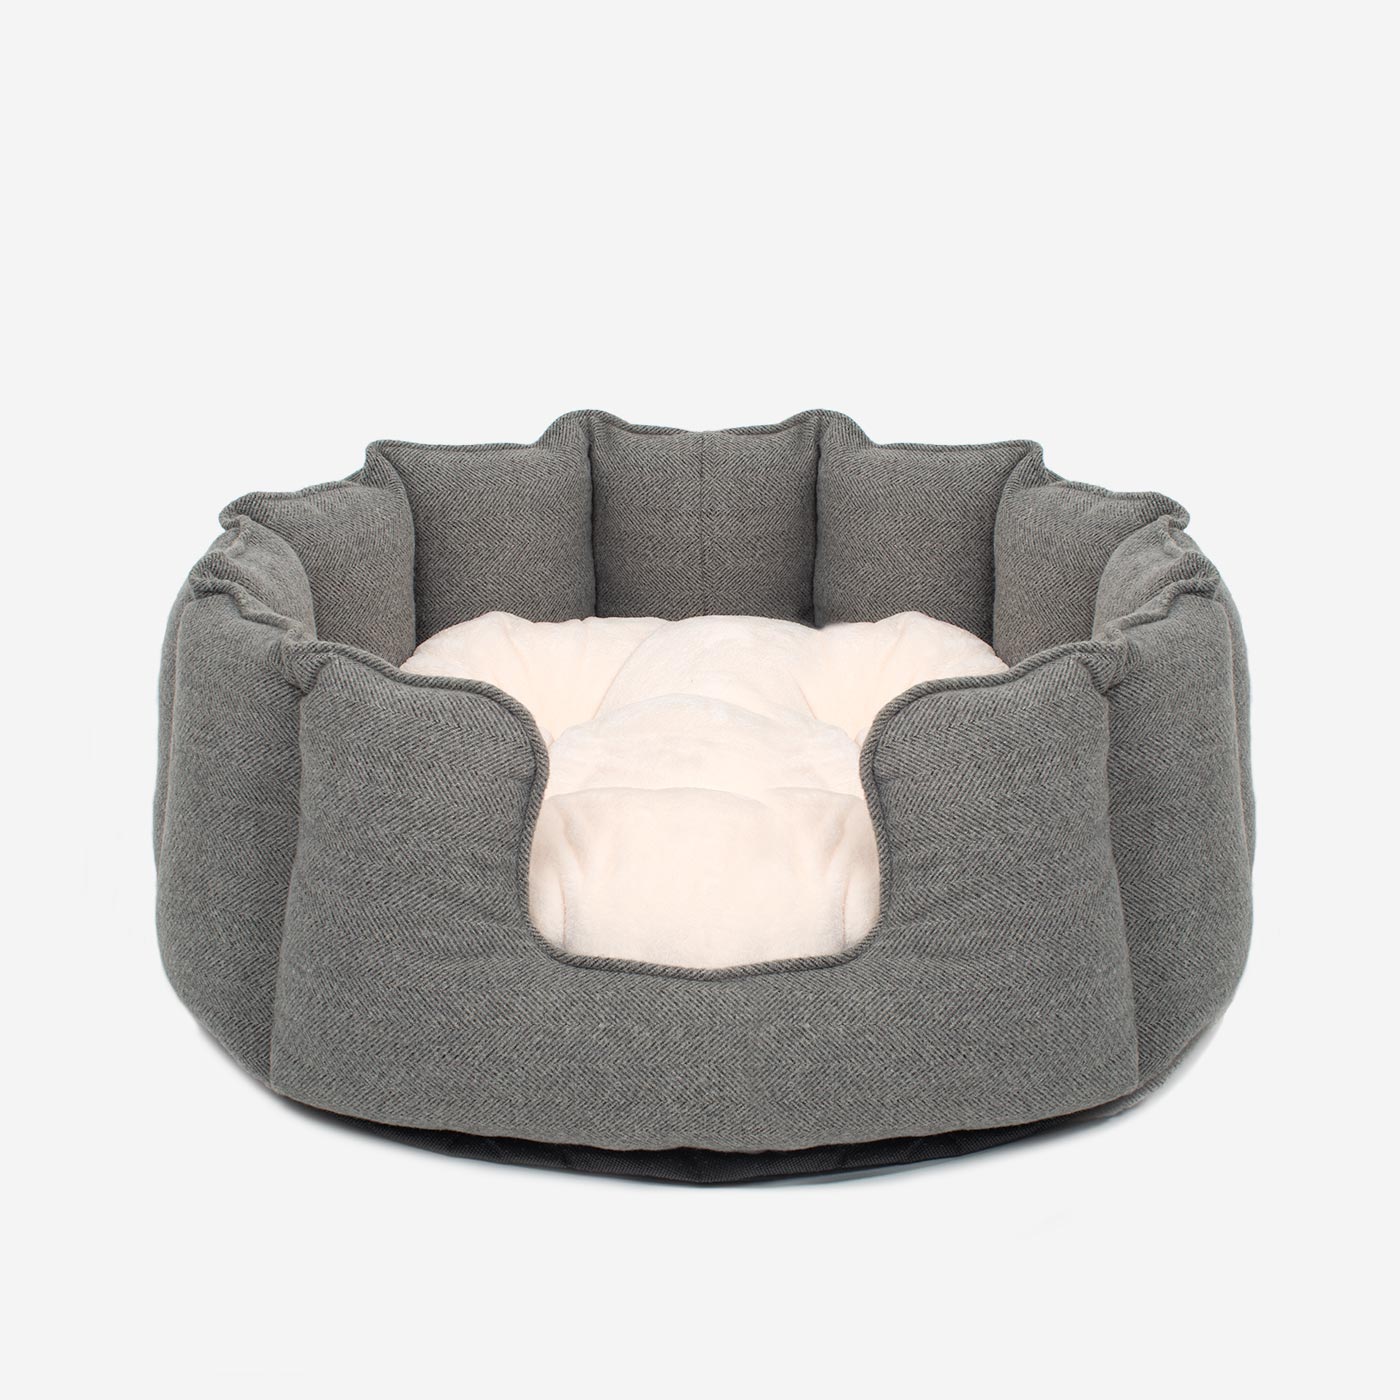 Discover Our Luxurious High Wall Bed For Cats, Featuring inner pillow with plush teddy fleece on one side To Craft The Perfect Cat Bed In Stunning Pewter Herringbone Tweed! Available To Personalise Now at Lords & Labradors    